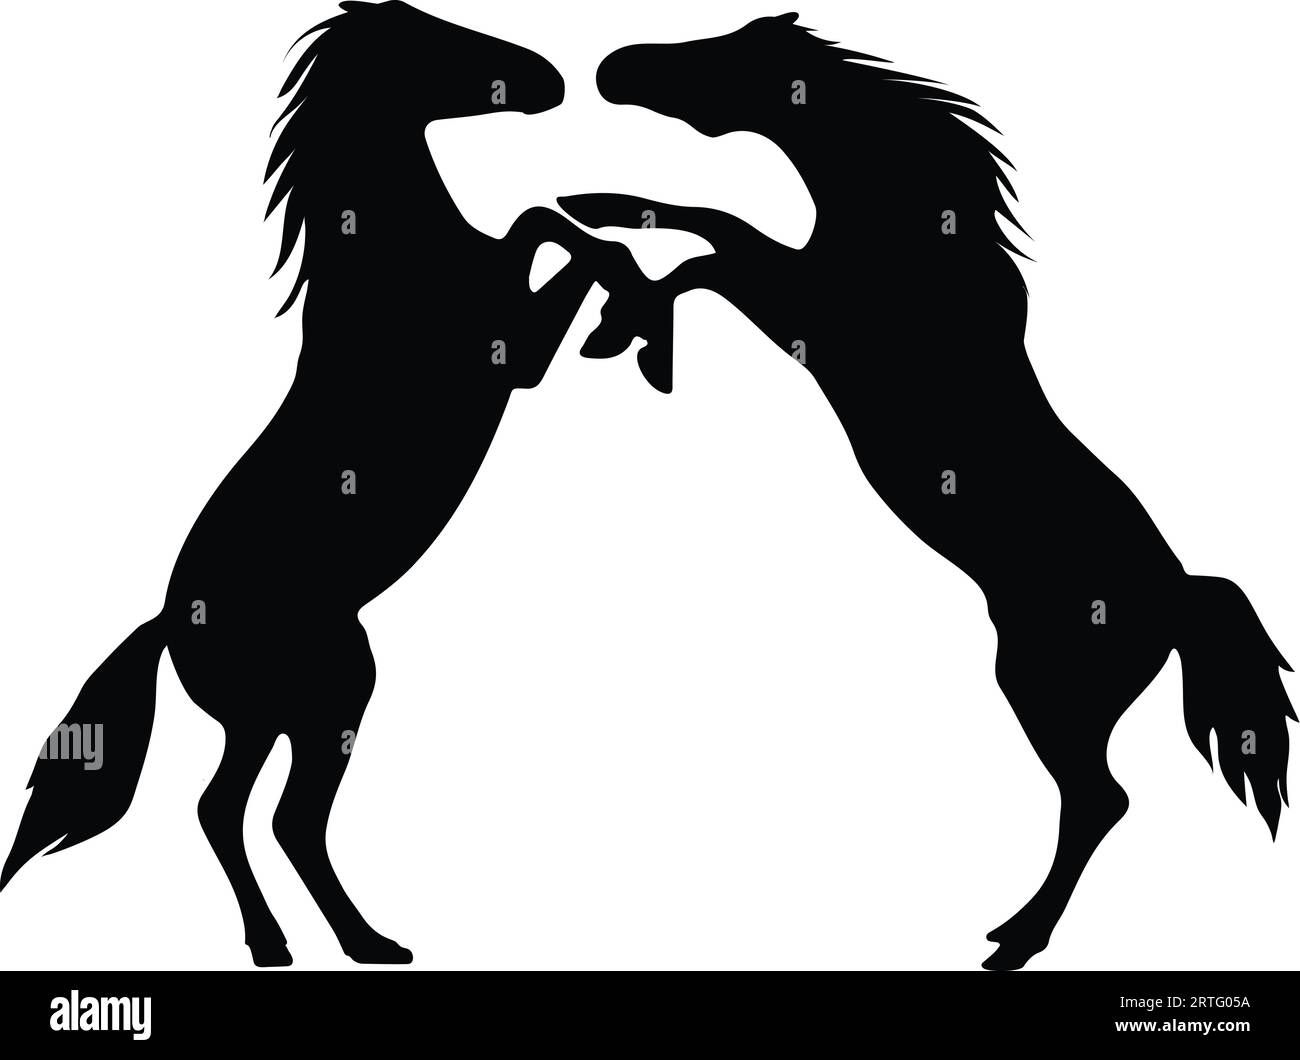 Horse fighting silhouette or vector file Stock Vector